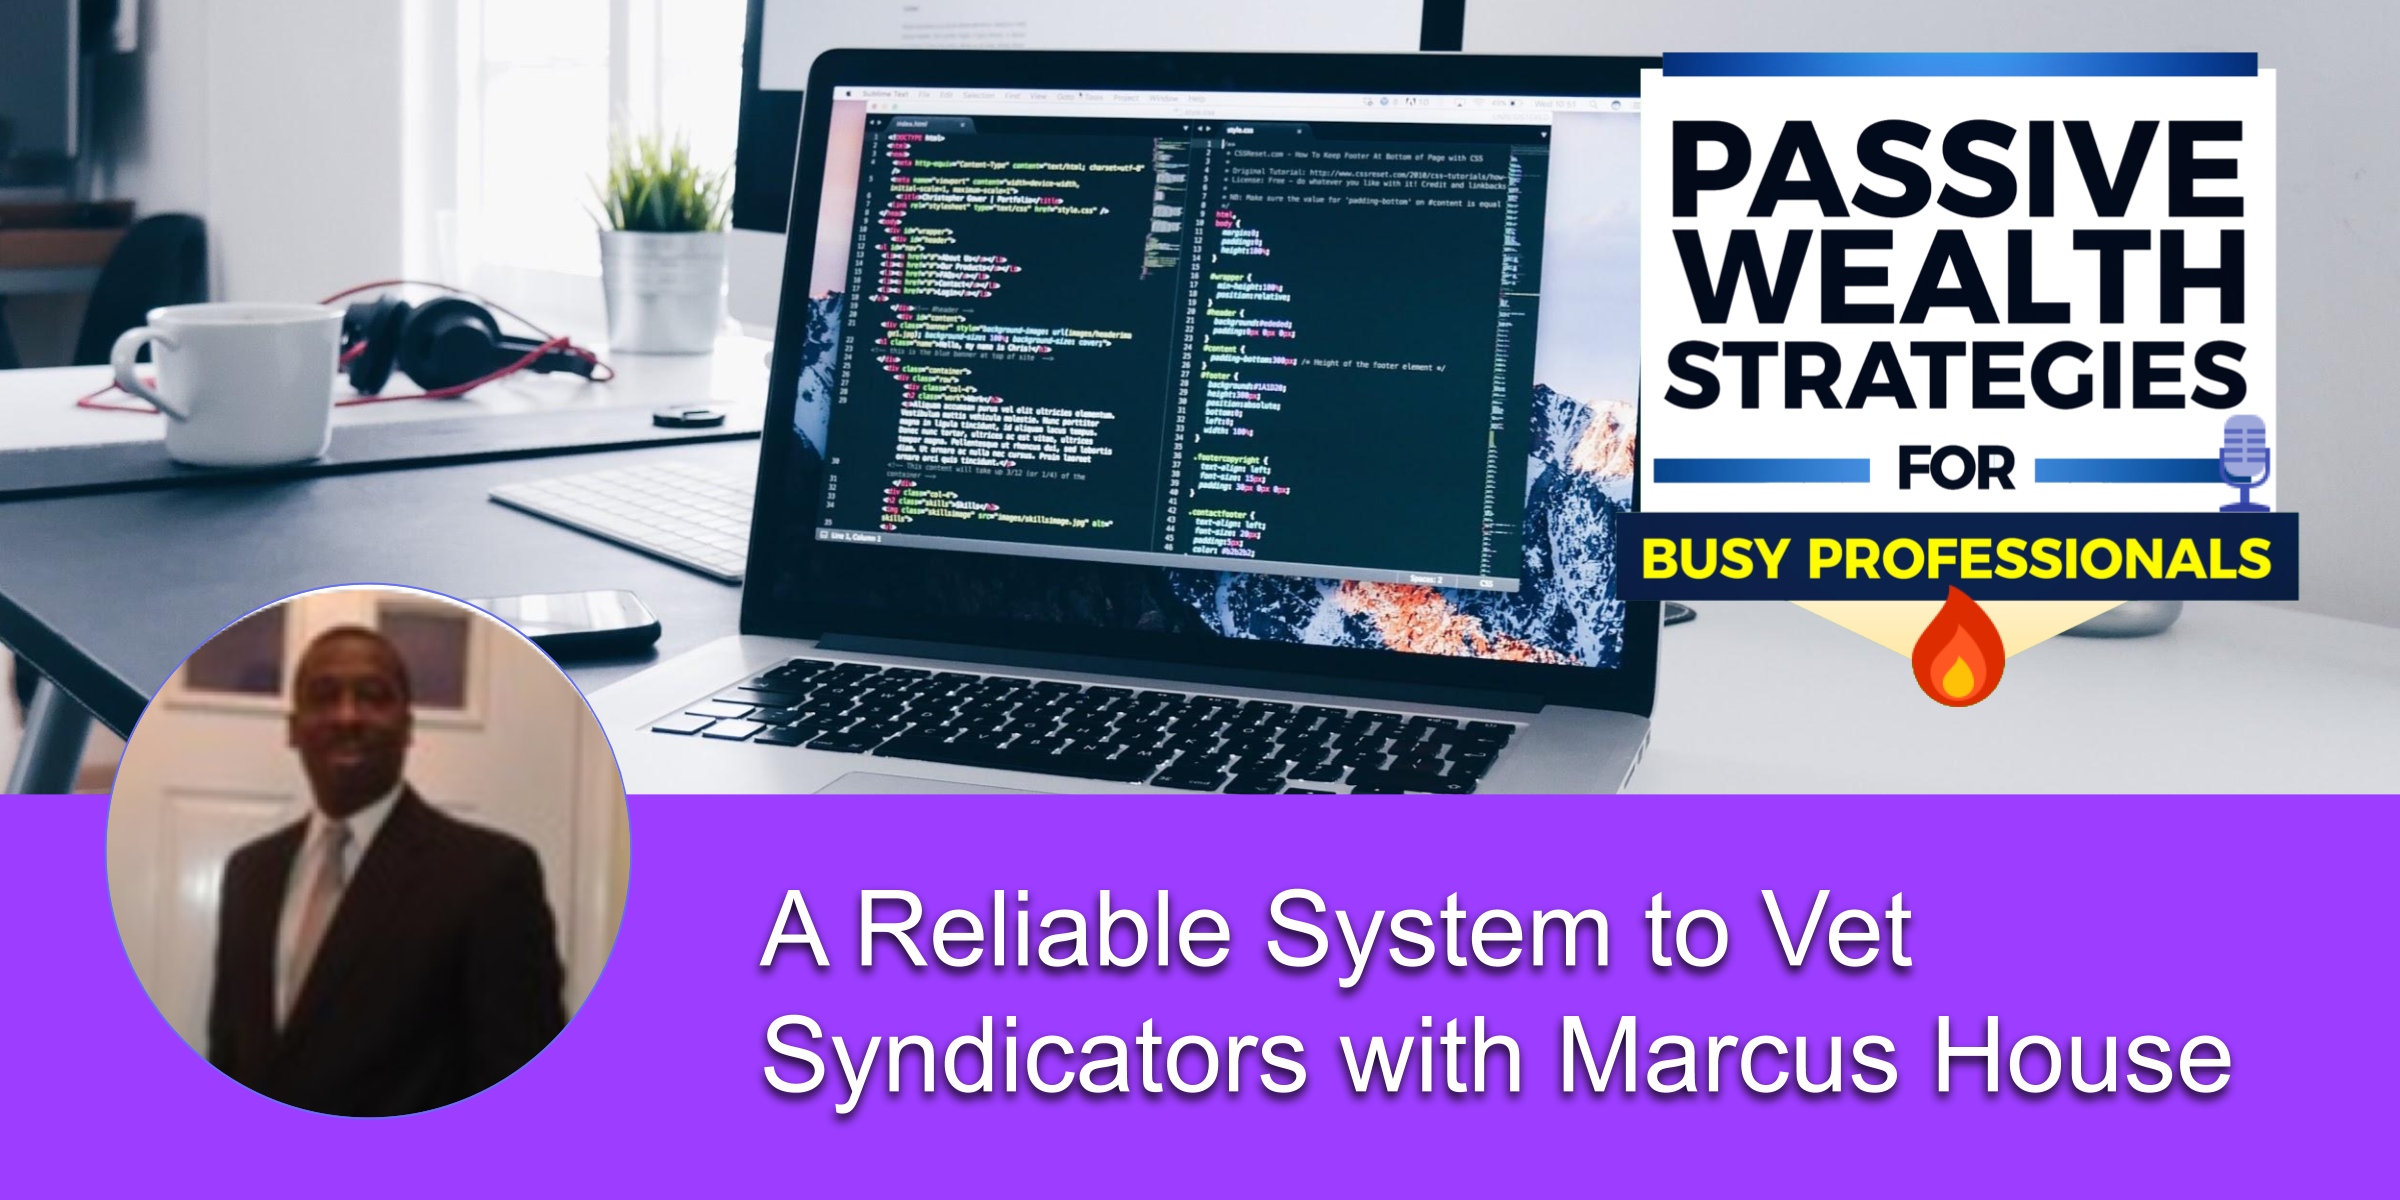 A Reliable System to Vet Syndicators with Marcus House